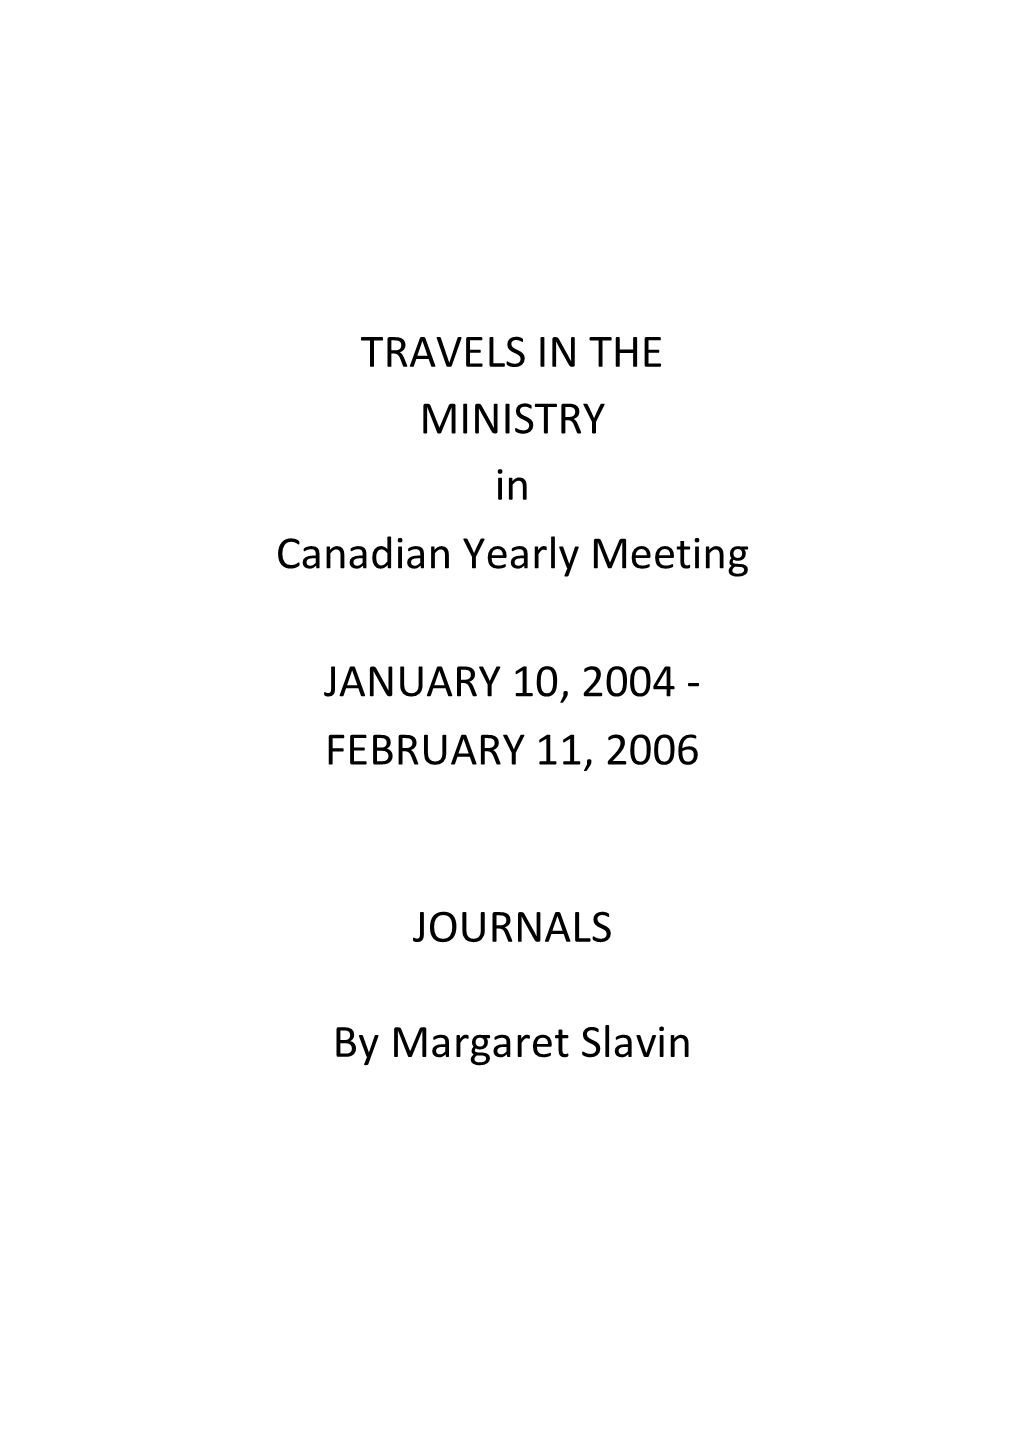 TRAVELS in the MINISTRY in Canadian Yearly Meeting